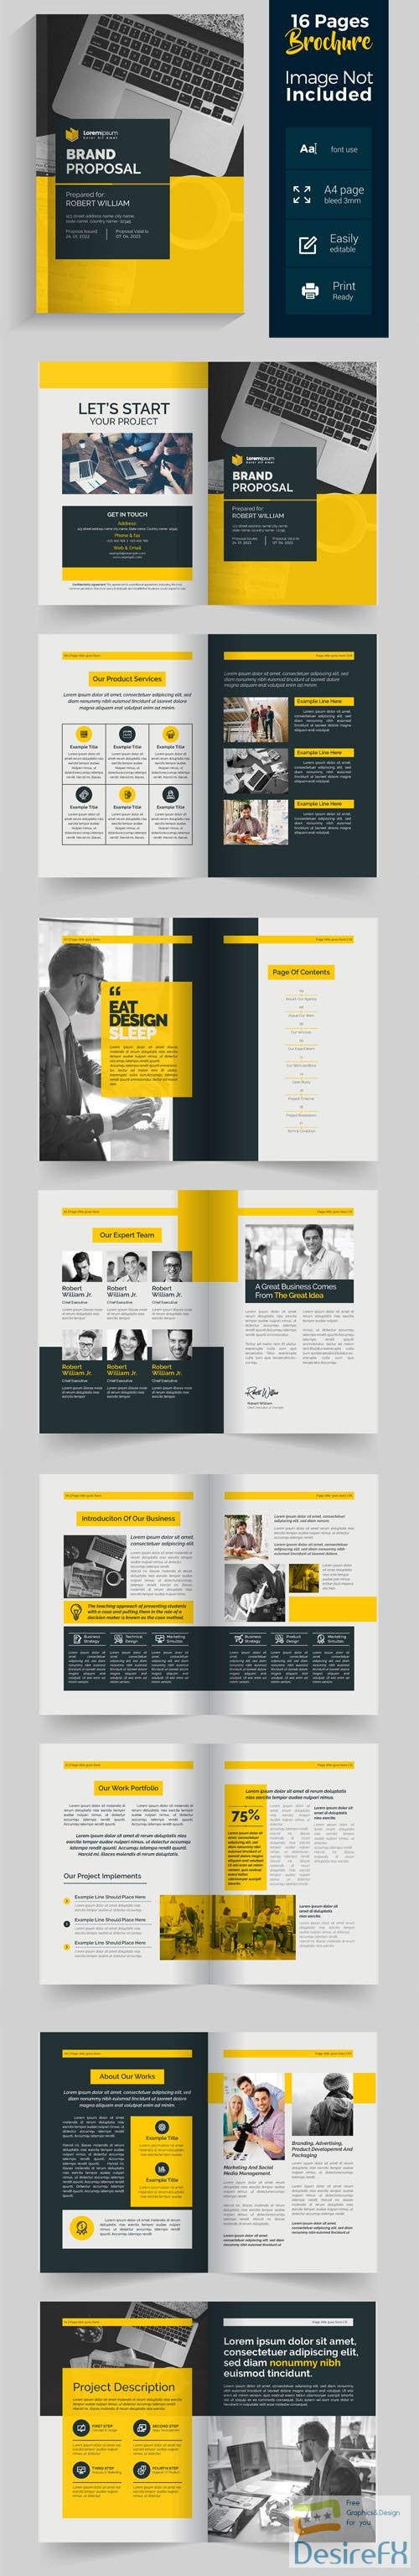 Corporate Brand Proposal - 16 Pages Brochure Vector Template